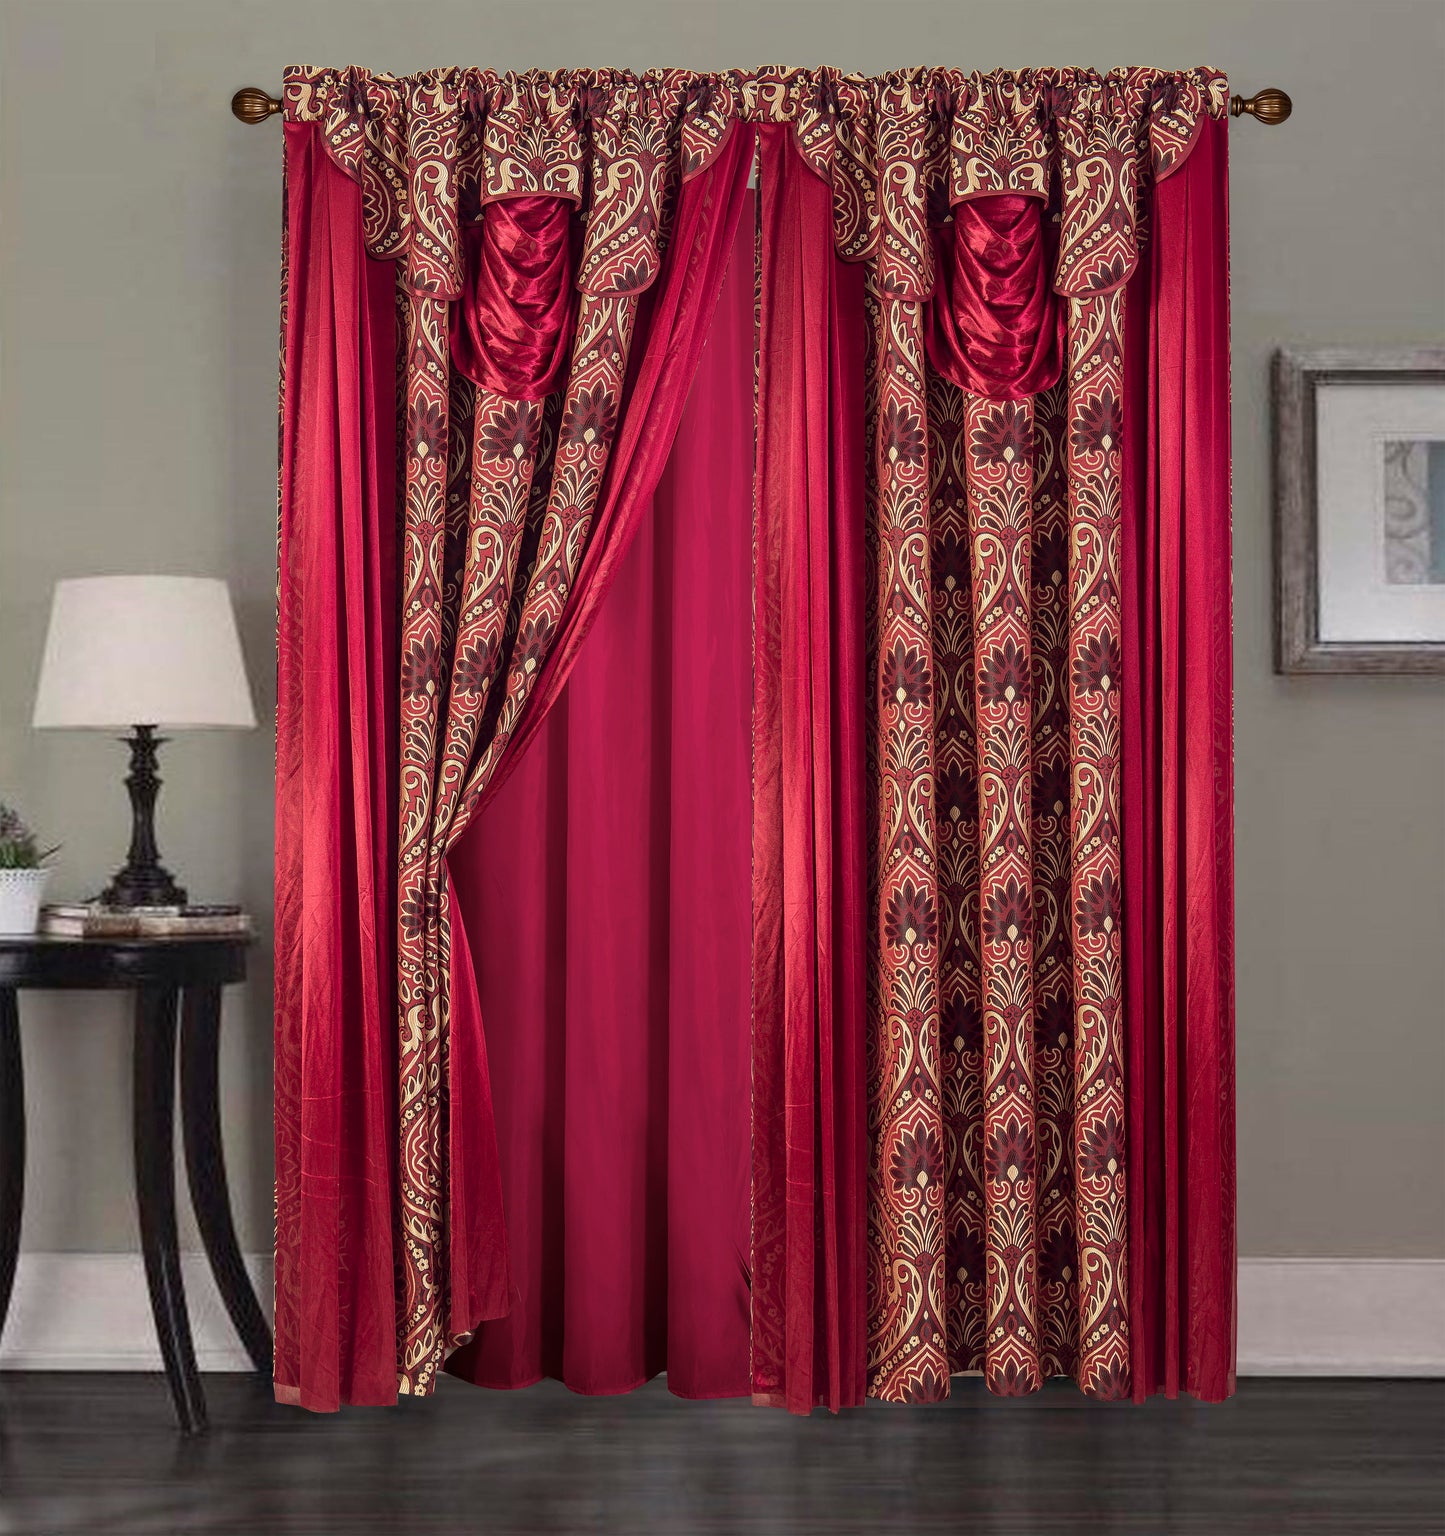 2PC CURTAIN SET W/ ATTACHED VALANCE & BACKING - Naomi